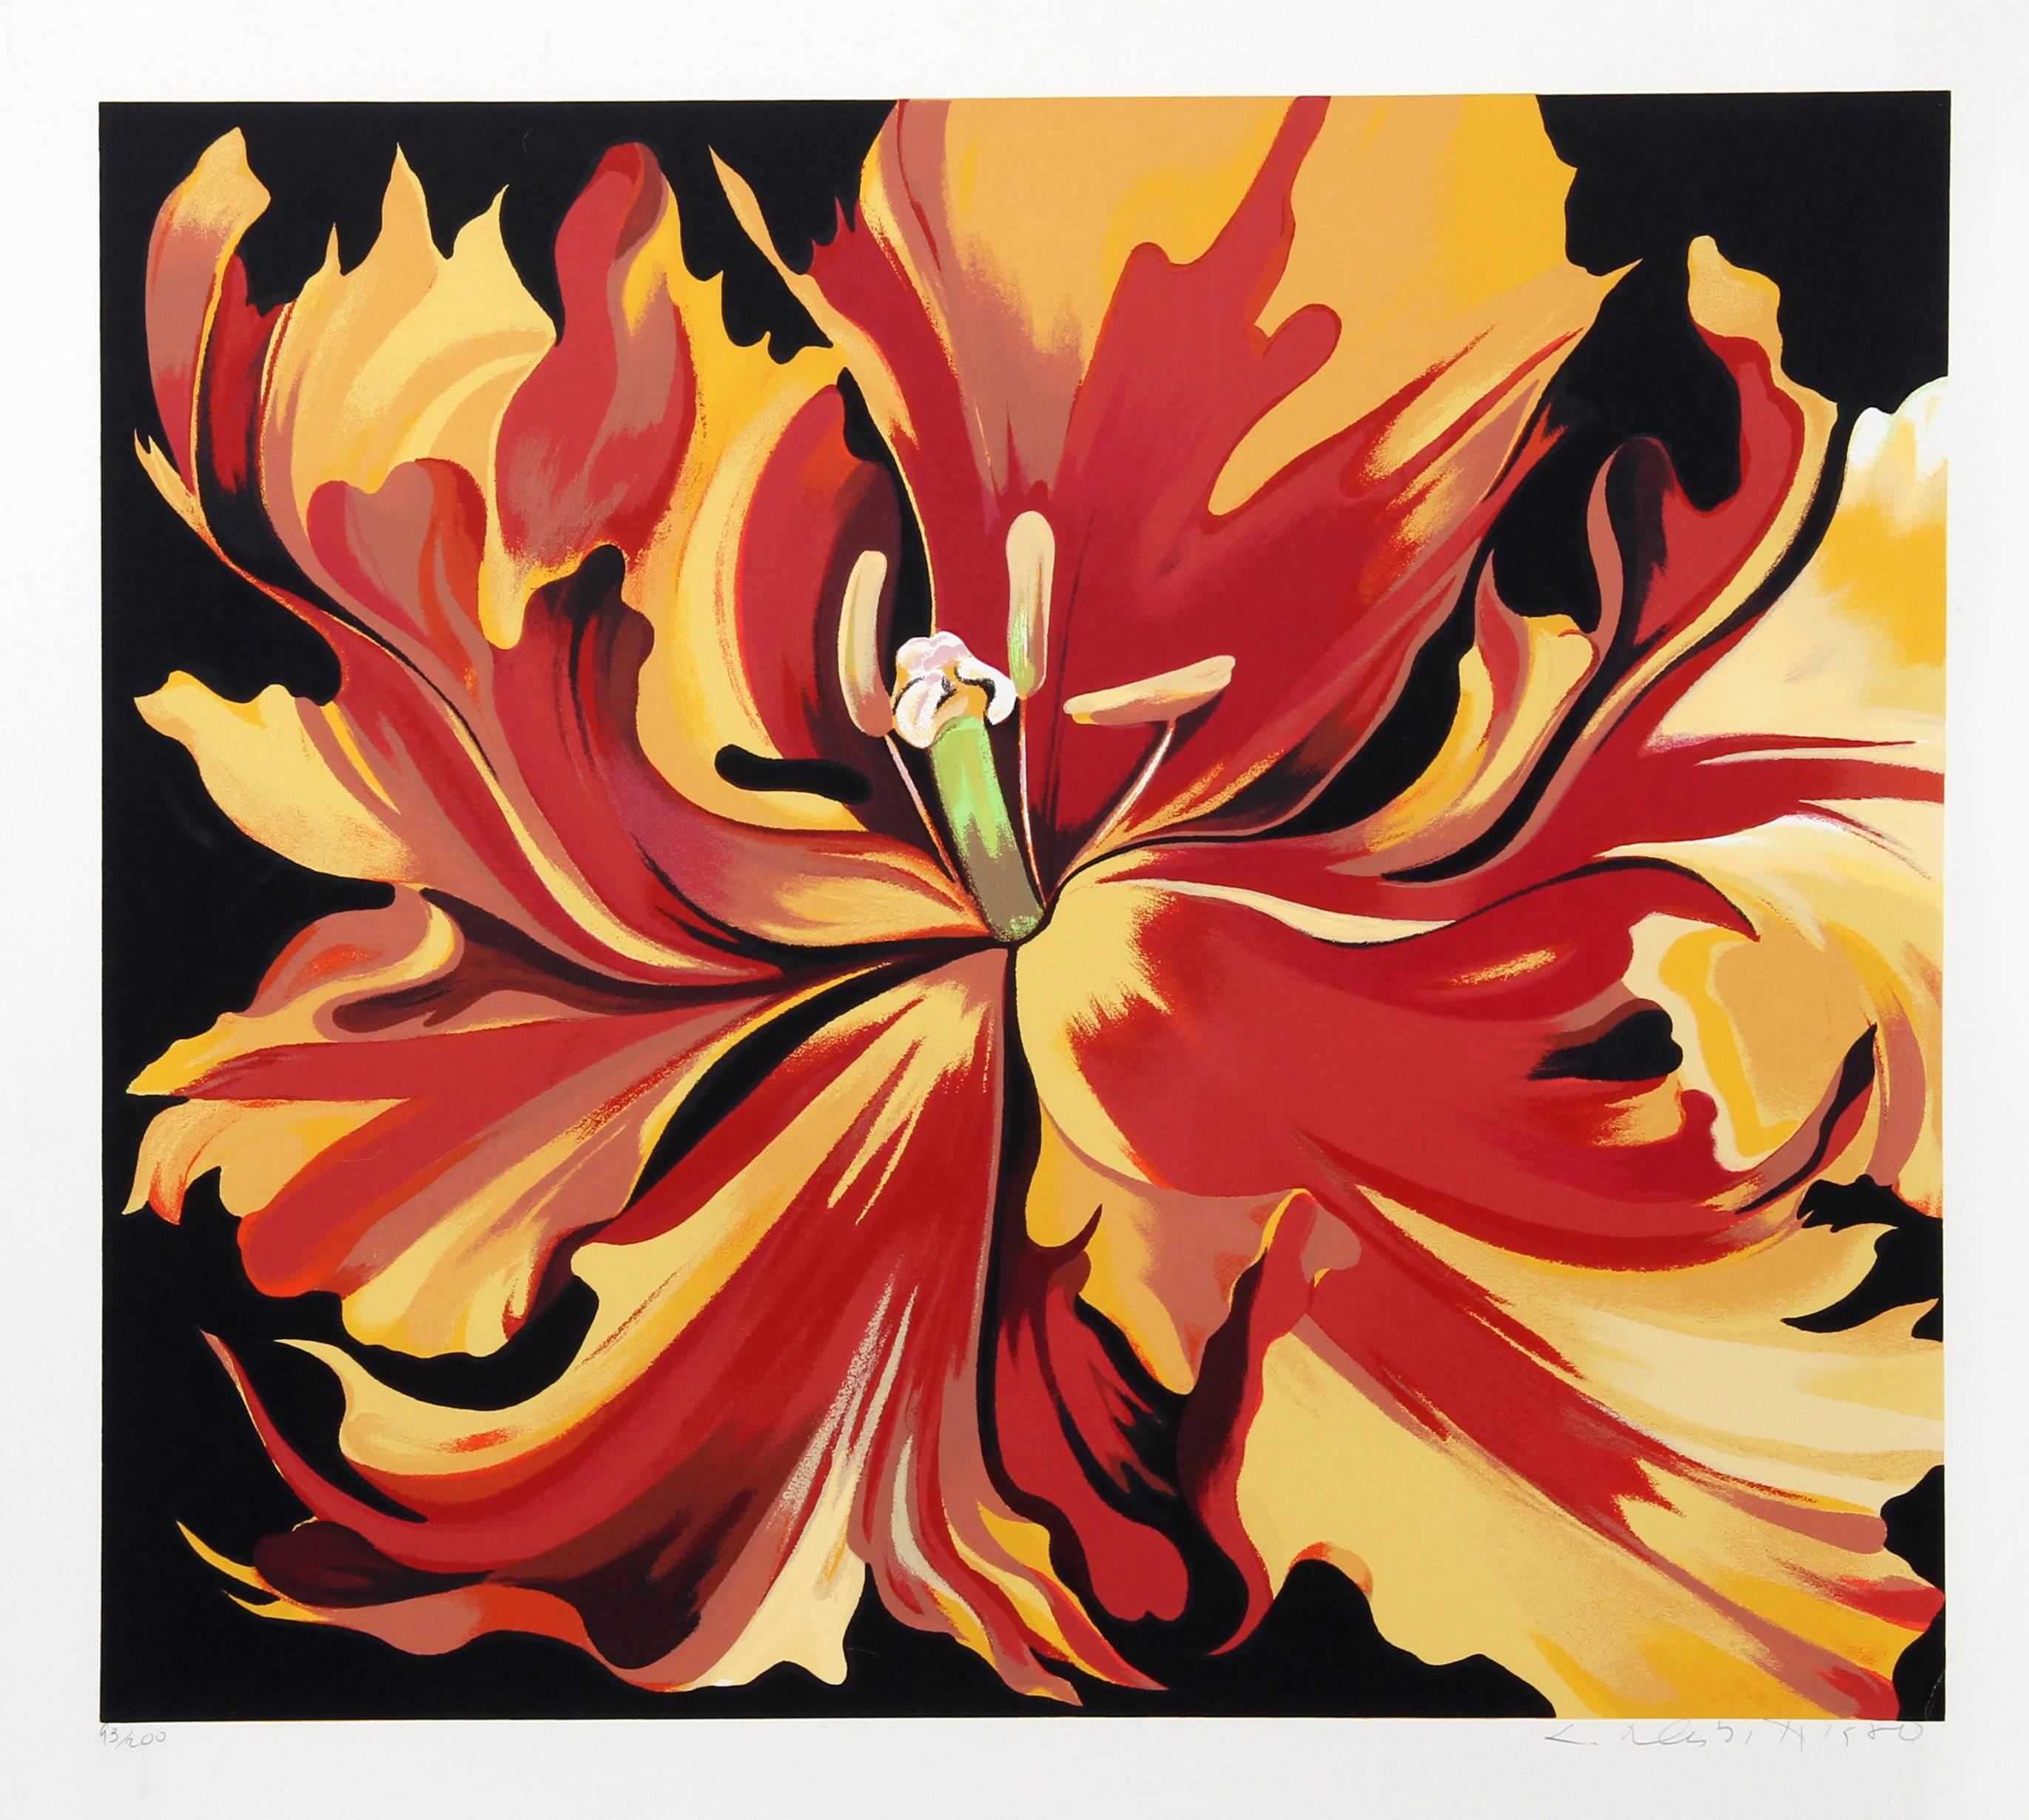 Artist: Lowell Blair Nesbitt, American (1933 - 1993)
Title: Red and Yellow Parrot Tulips
Year: 1980
Medium: Serigraph, signed and numbered in pencil
Edition: 200
Image Size: 24.5 x 28 inches
Size: 31 in. x 34 in. (78.74 cm x 86.36 cm)